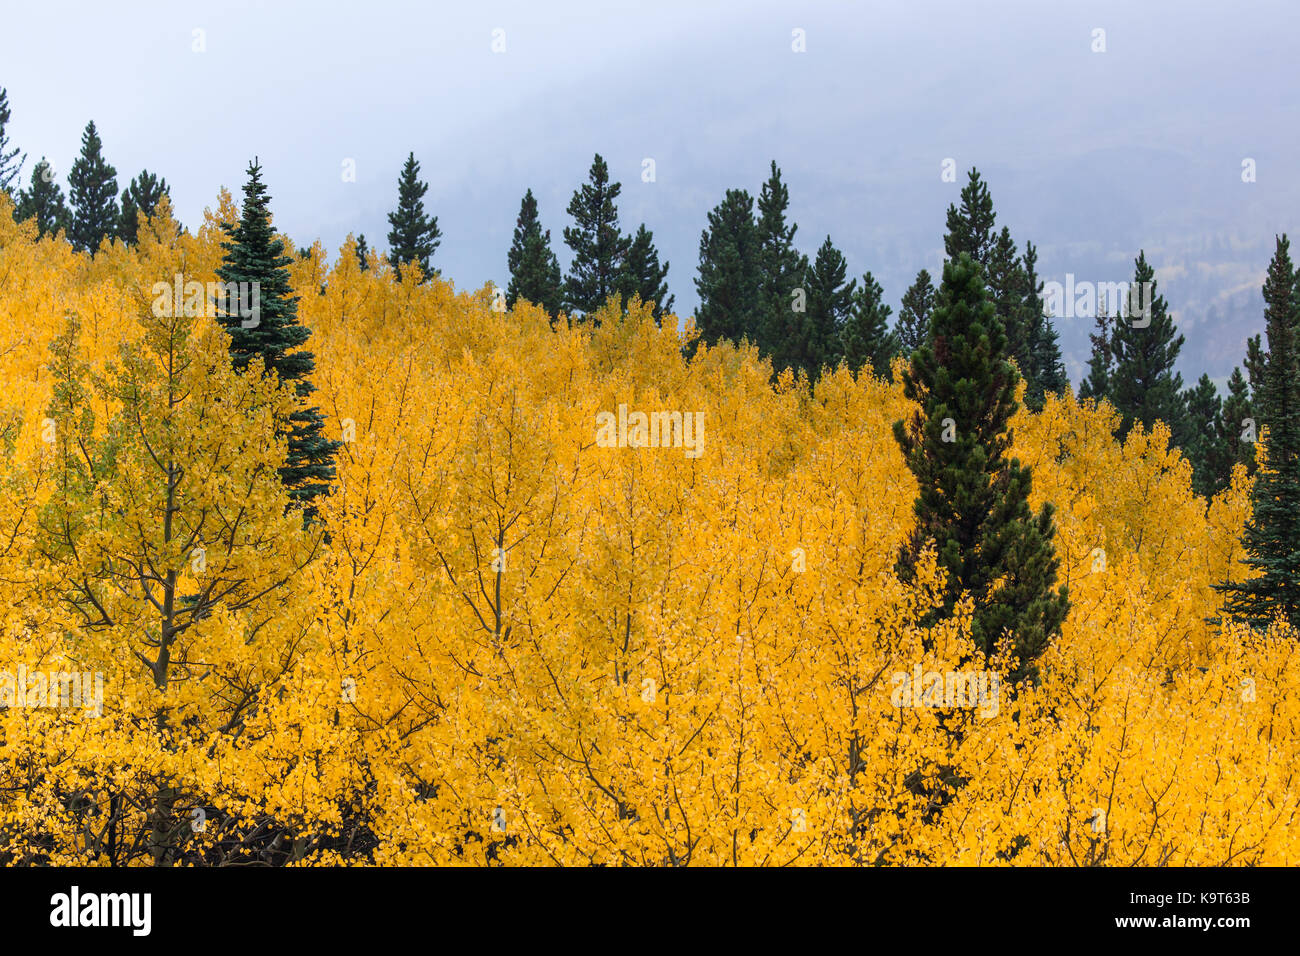 A grove of aspen trees with brilliant golden fall color and a few green conifer trees sprinkled through out with creeping fog in the background. Stock Photo